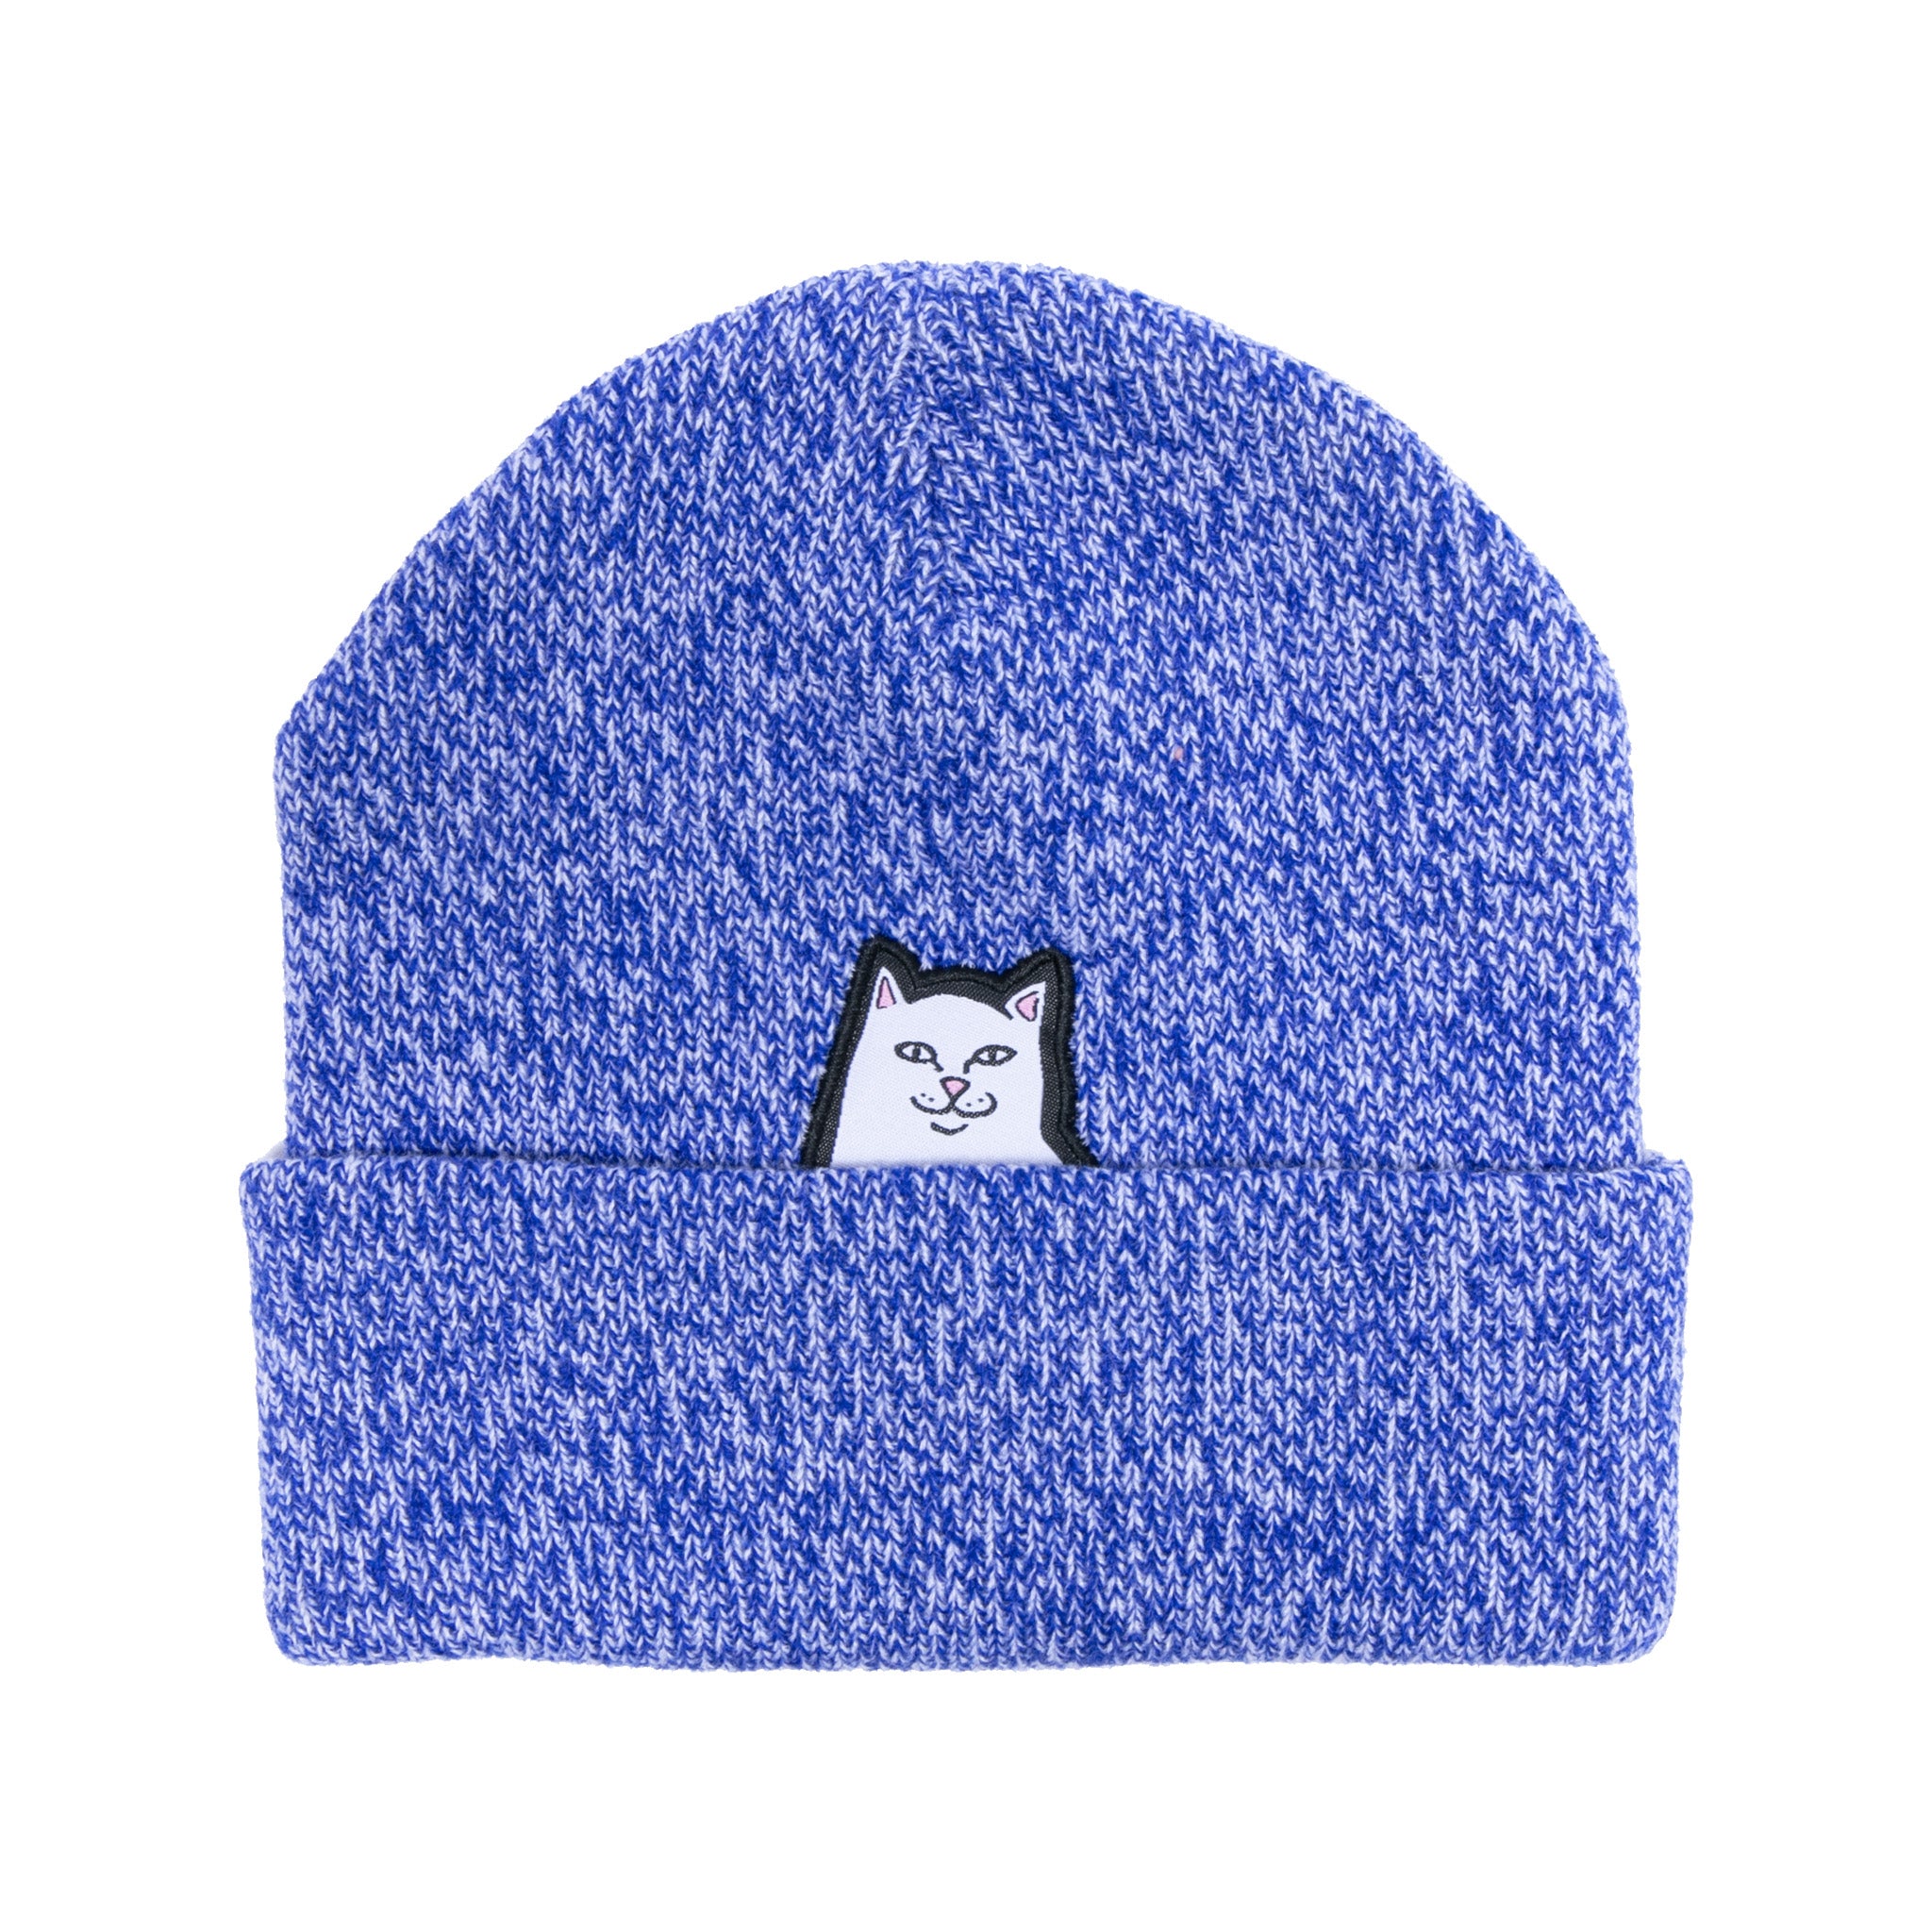 Lord Nermal Beanie (Blue Speckle)